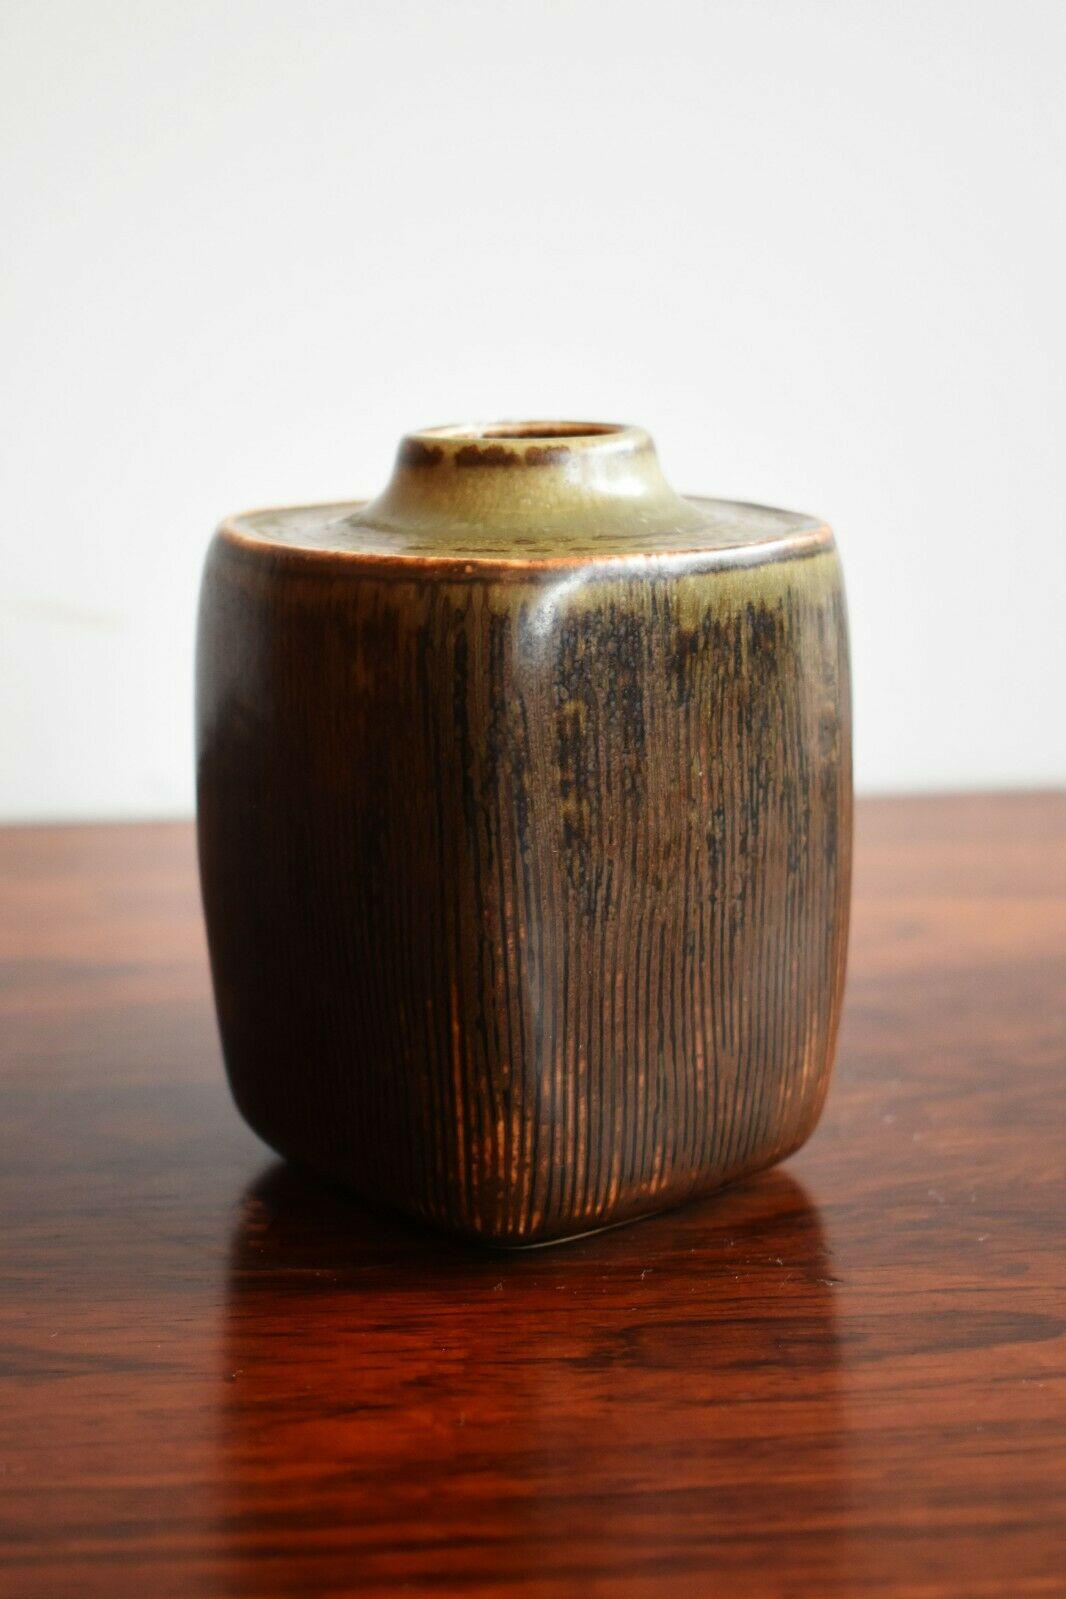 A Copenhagen Pottery ceramic vase with beautiful and intricate textural pattern line detailing. The pot boasts a range of earthy tones, from deep browns to some subtle blue/grey tones, which are accentuated by the grooves and textures within the pot